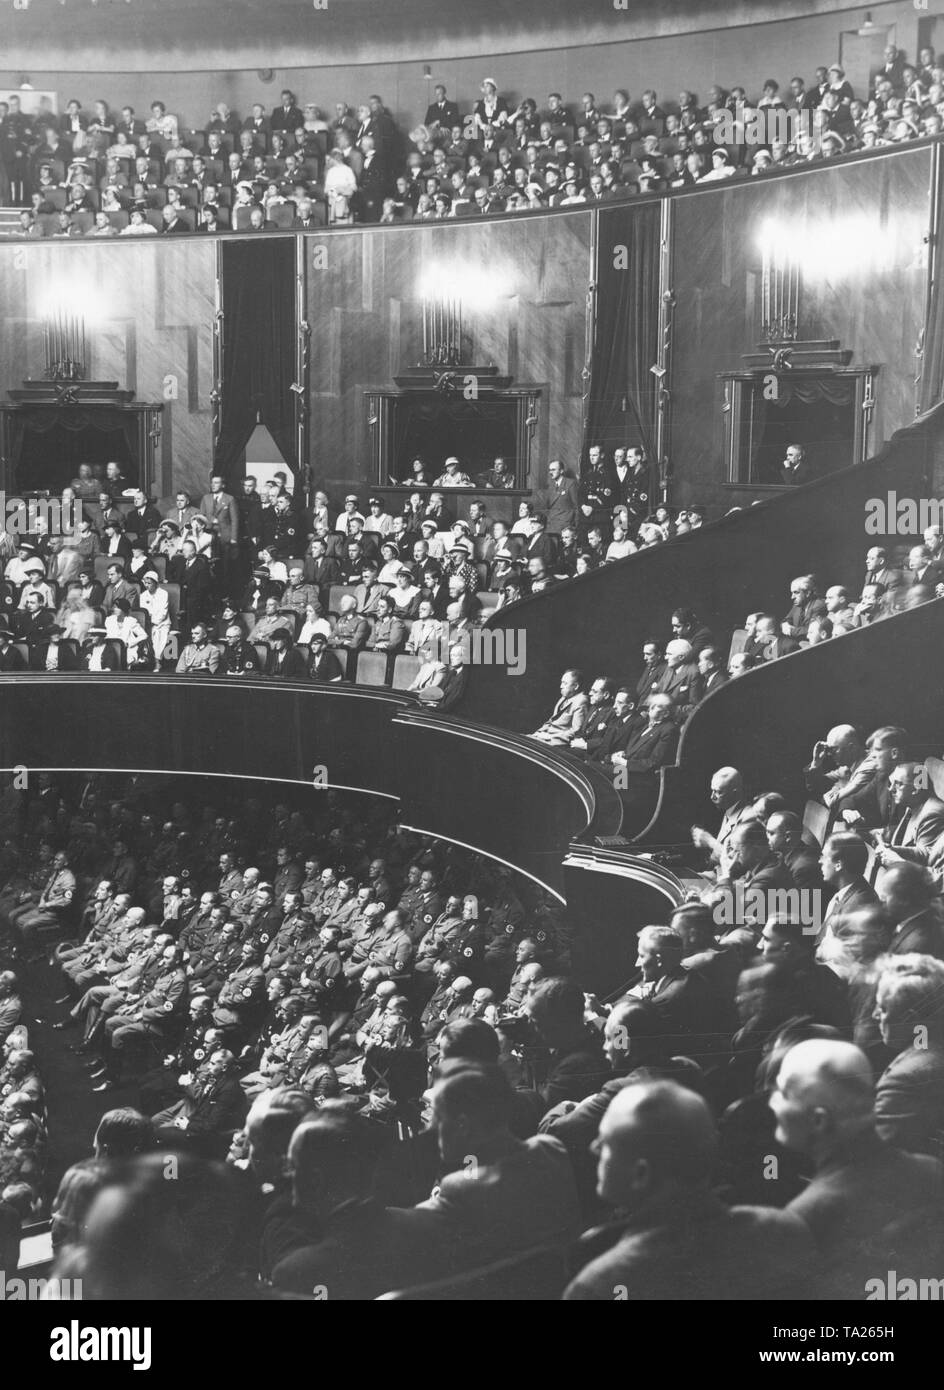 Spectators, including ambassadors in the diplomats' box (center), during a session of the Reichstag on the so-called Roehm Putsch. Stock Photo